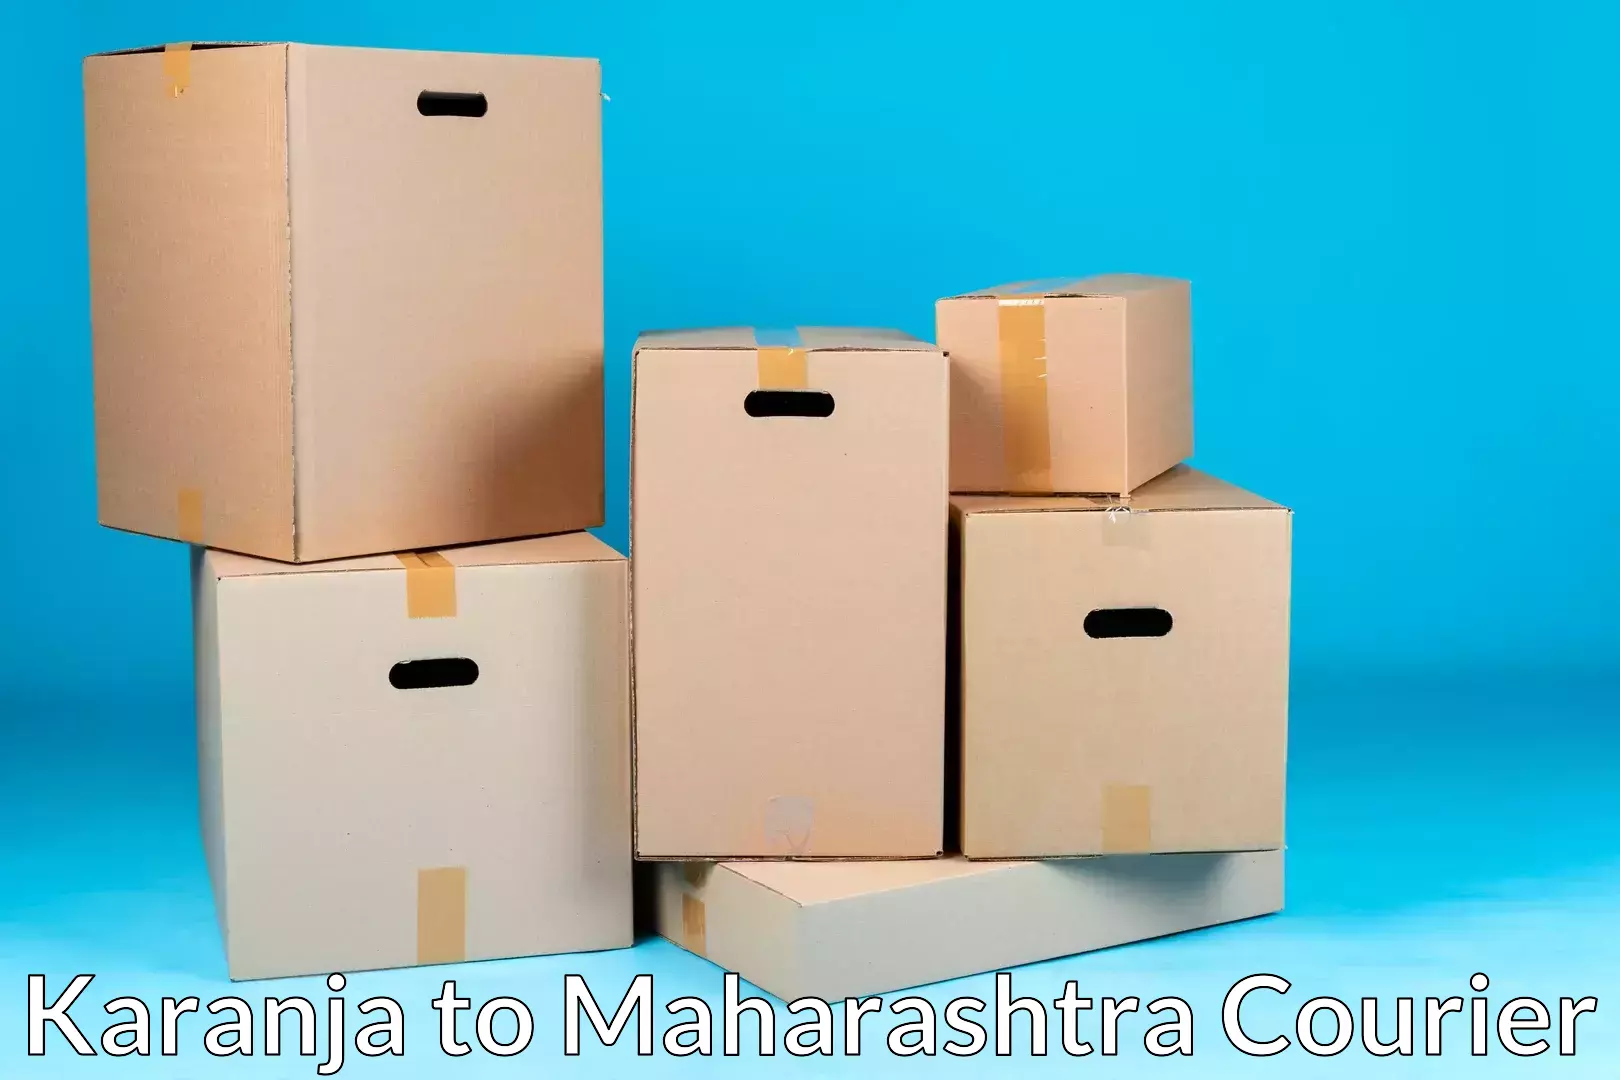 Quality relocation services Karanja to Pune